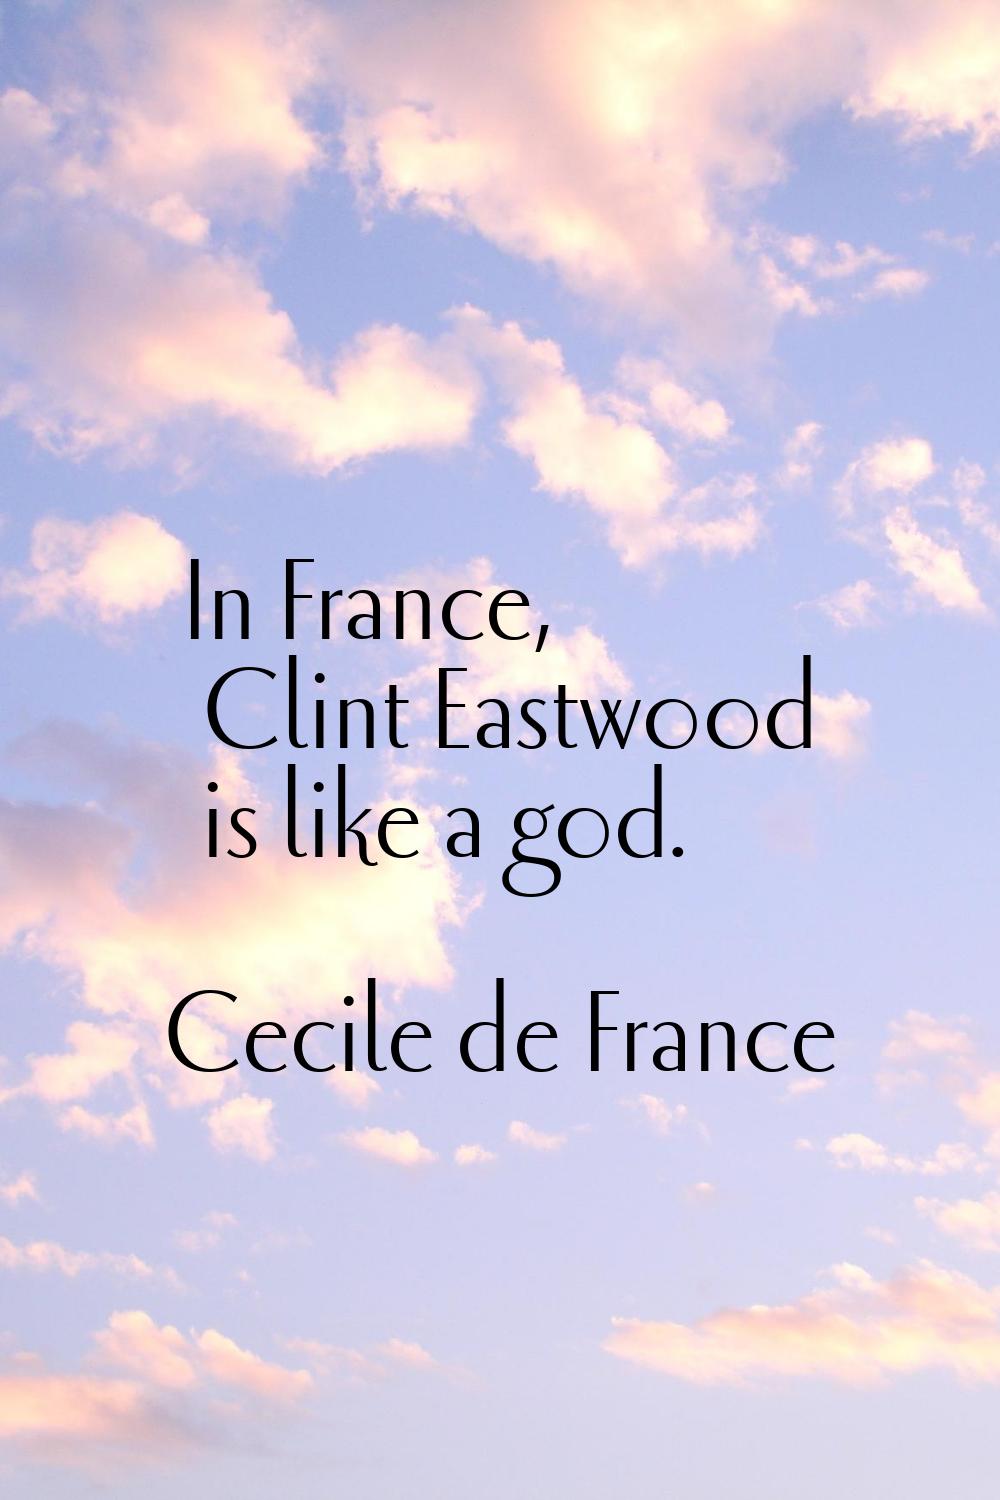 In France, Clint Eastwood is like a god.